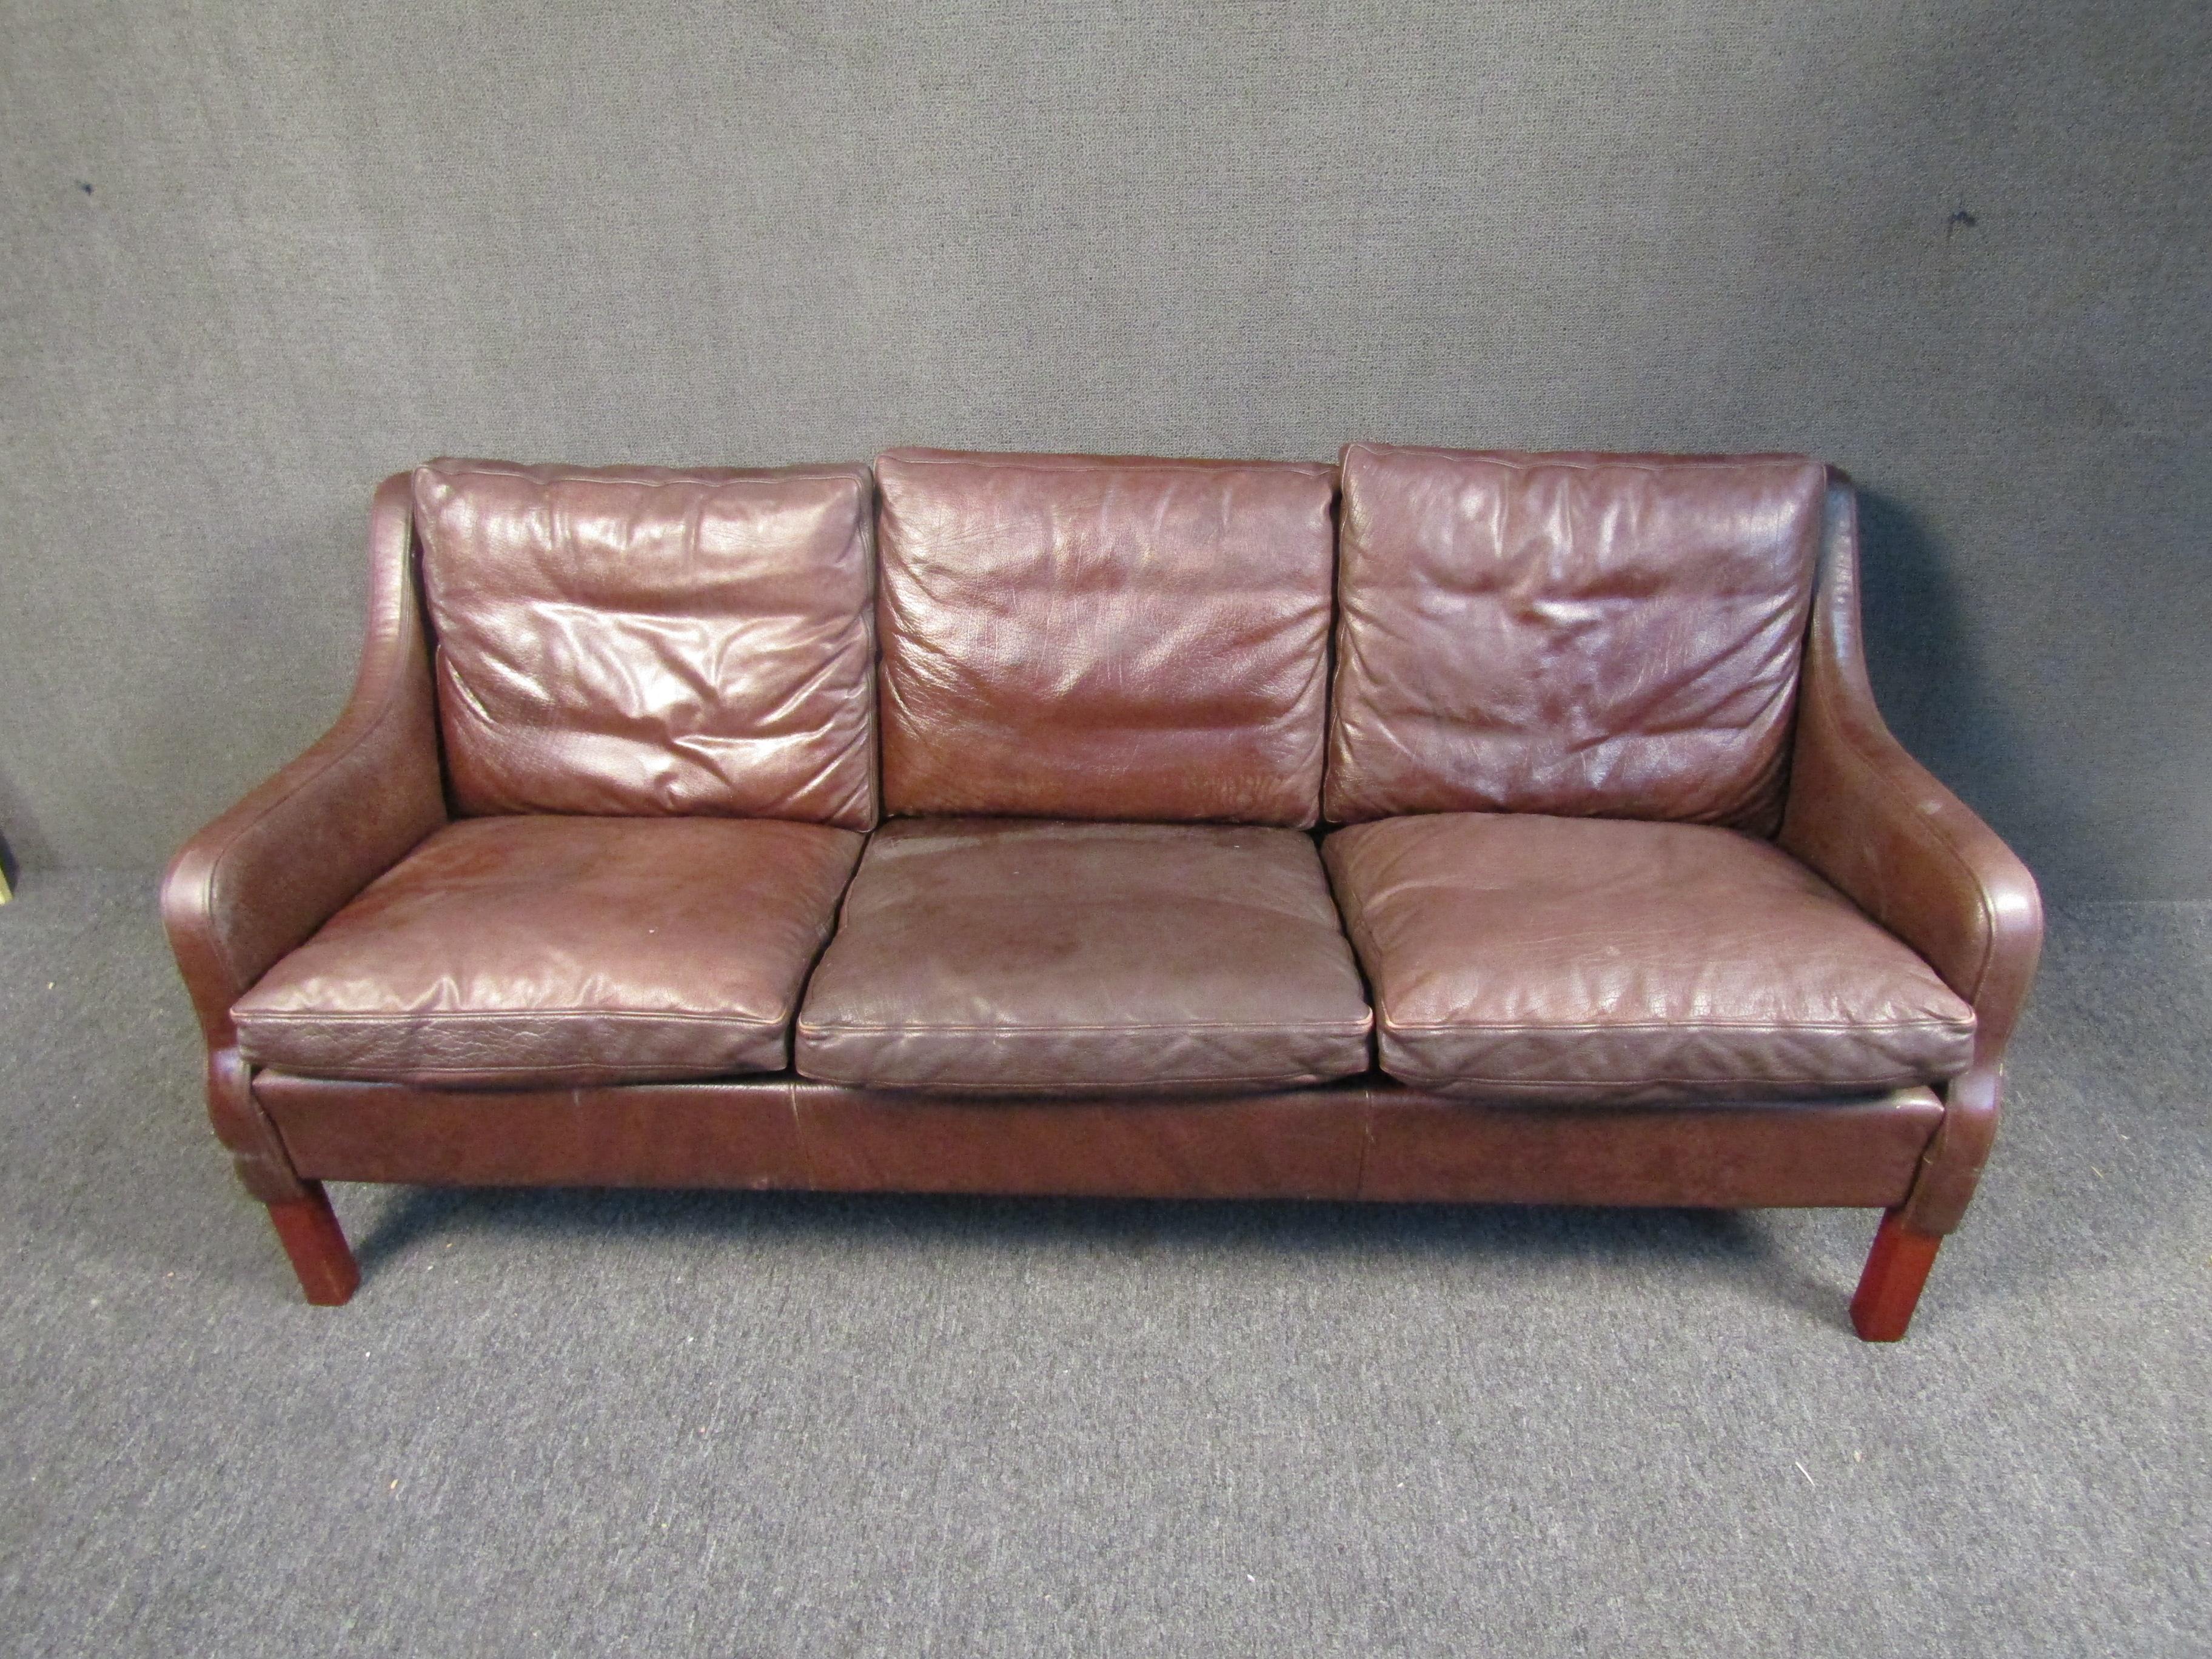 Mid-Century Modern danish style burgundy leather sofa. Featuring sloped arm rests and rich wood grain legs.

Please confirm item location (NY or NJ).